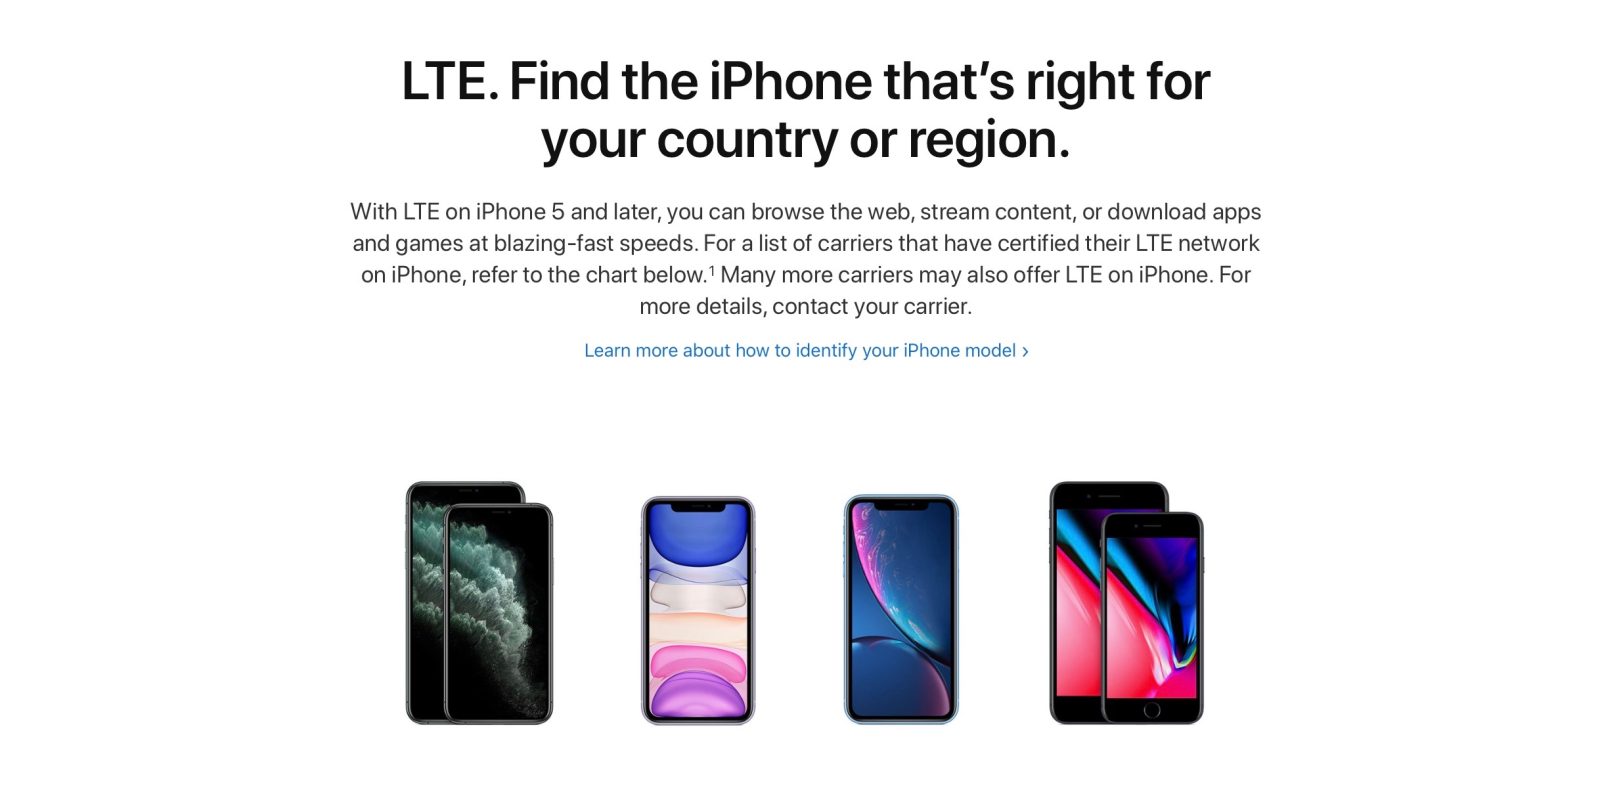 How to check what LTE bands iPhone 11 and iPhone 11 Pro have